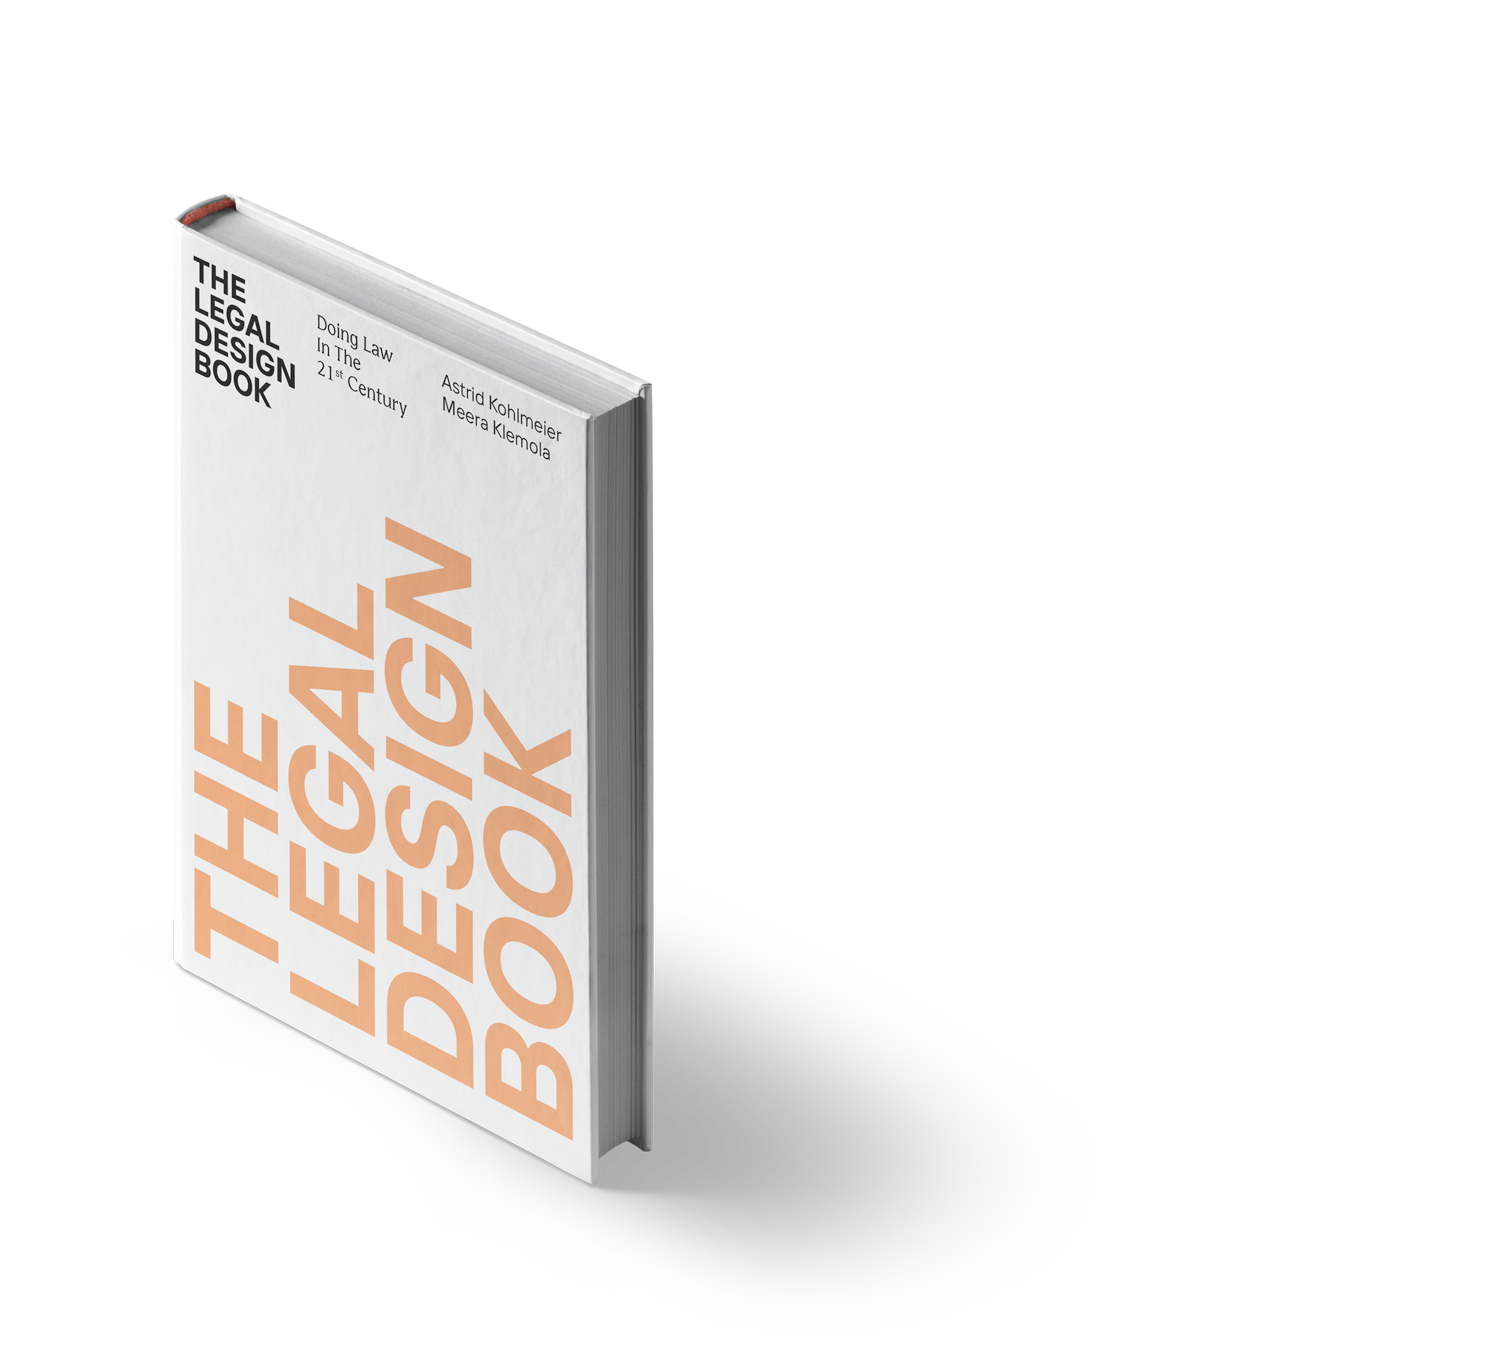 The Legal Design Book cover teaser image